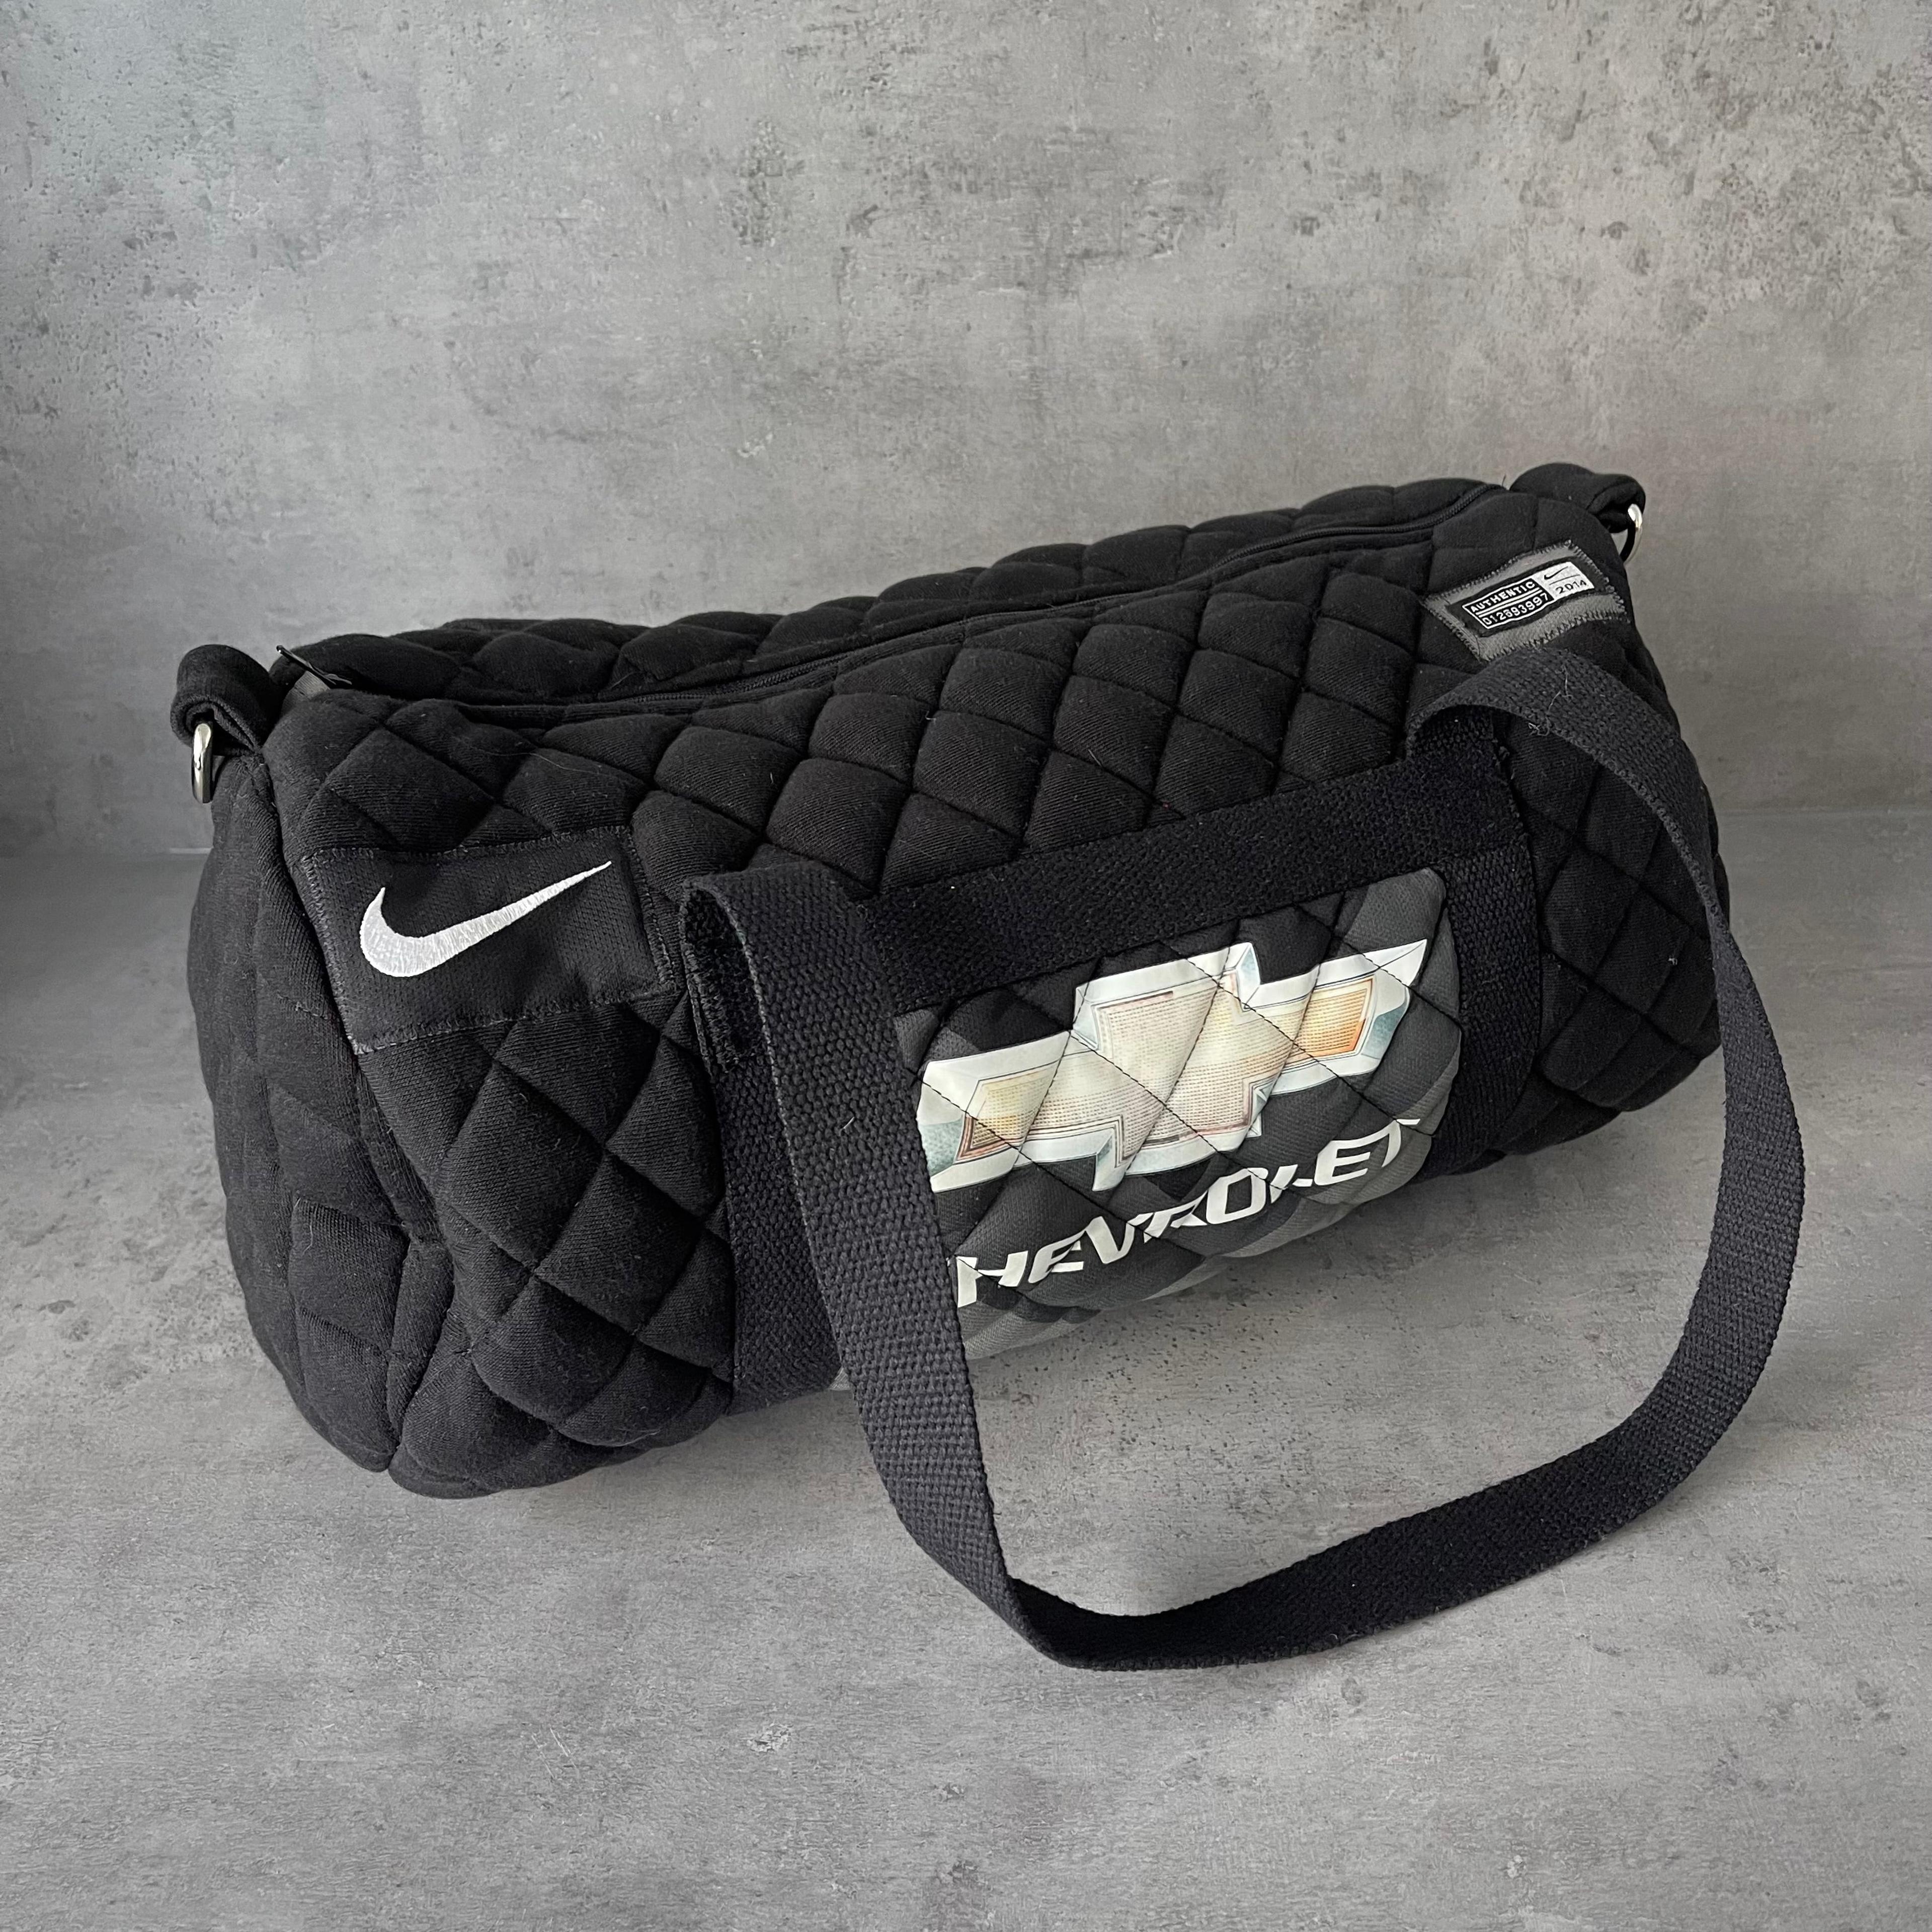 Alternate View 1 of Quilted Duffle Bag Black